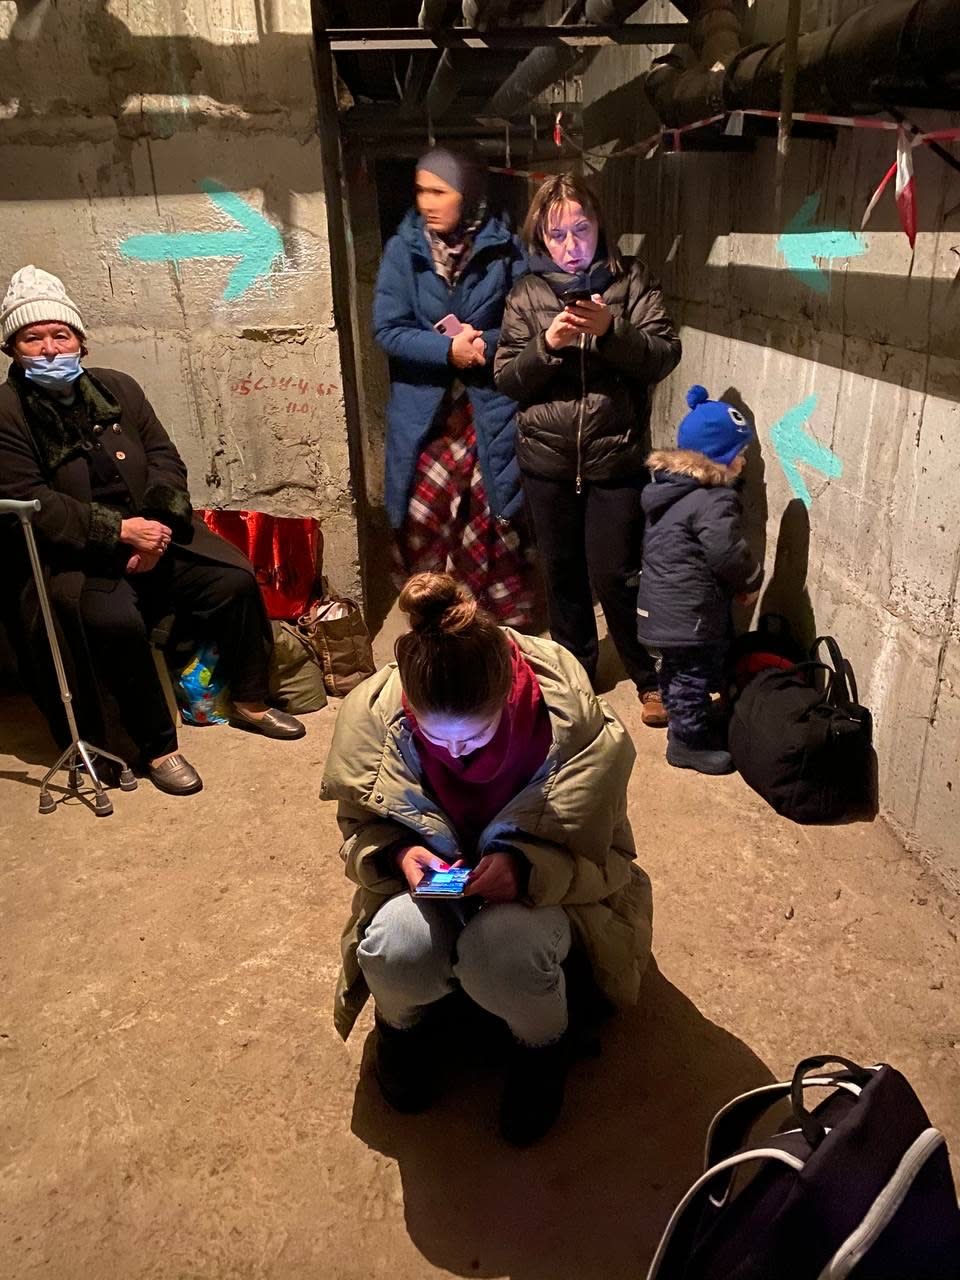 MacPaw team working from a bomb shelter during an air raid alert